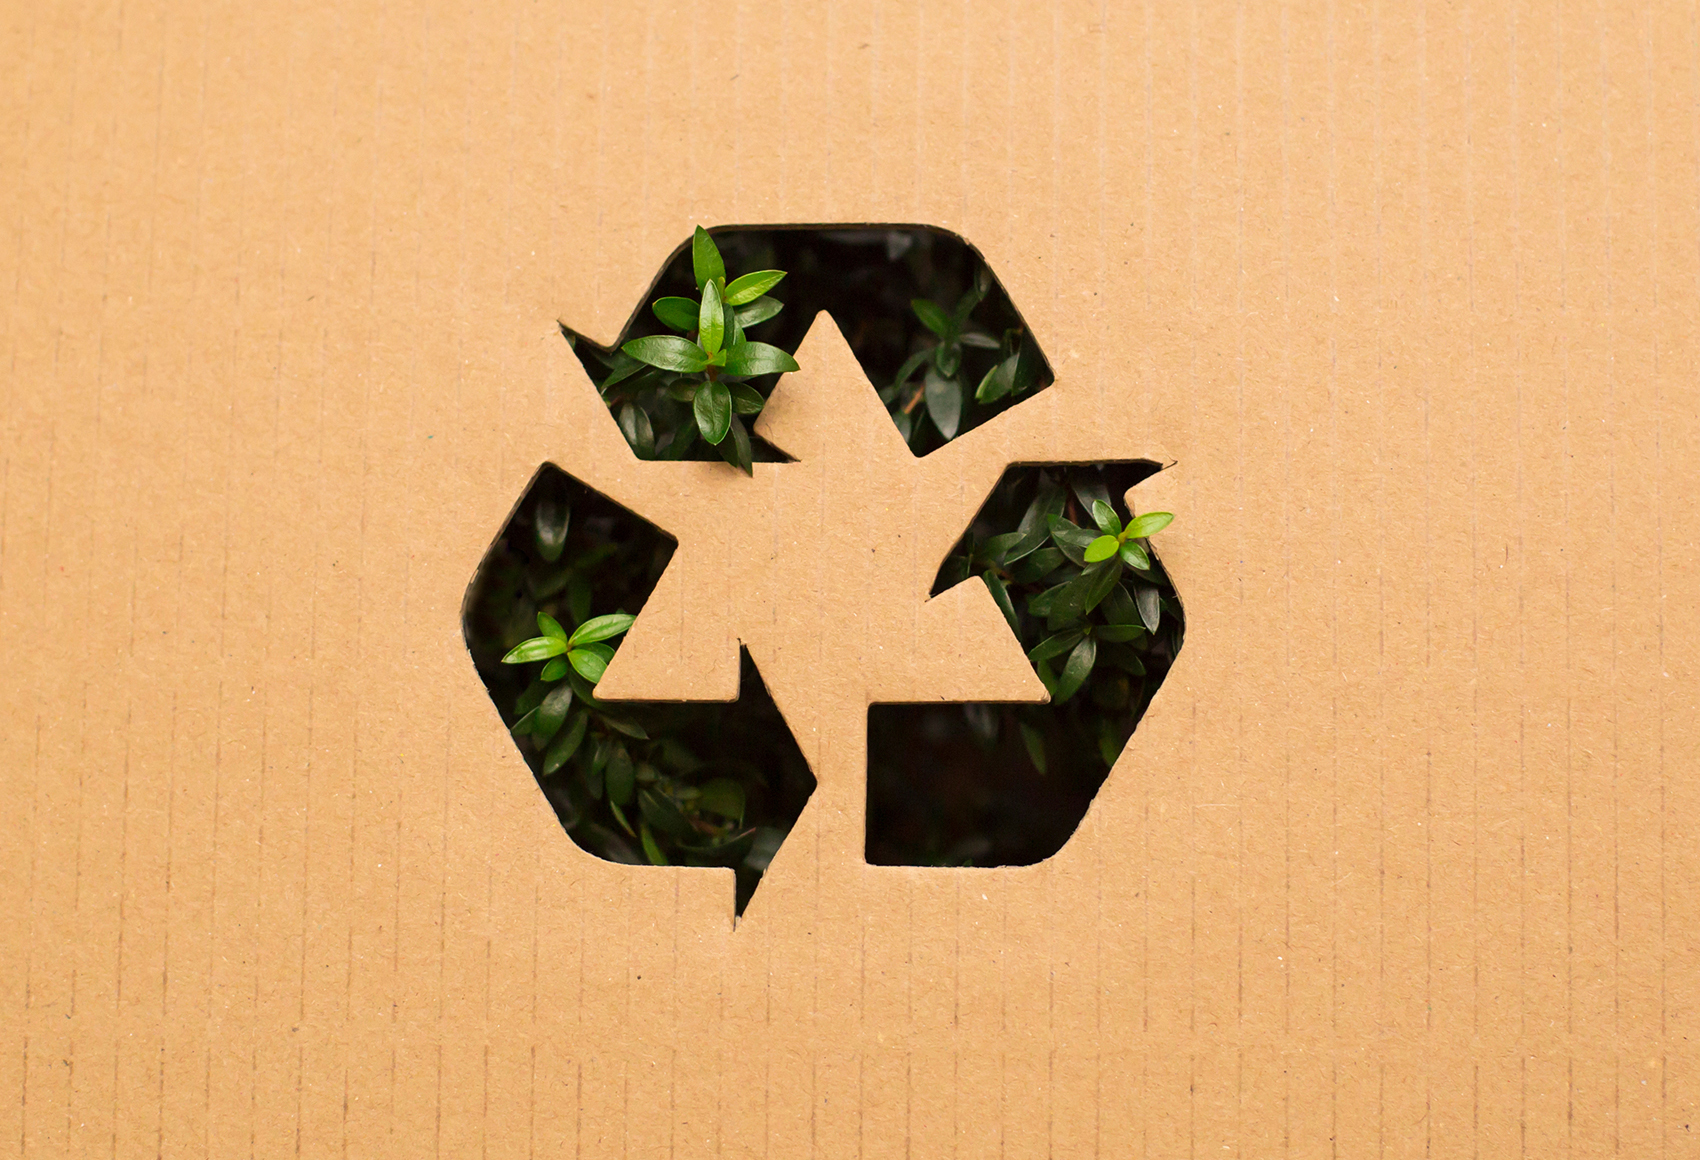 Creative Ways to Repurpose and Recycle  Packaging